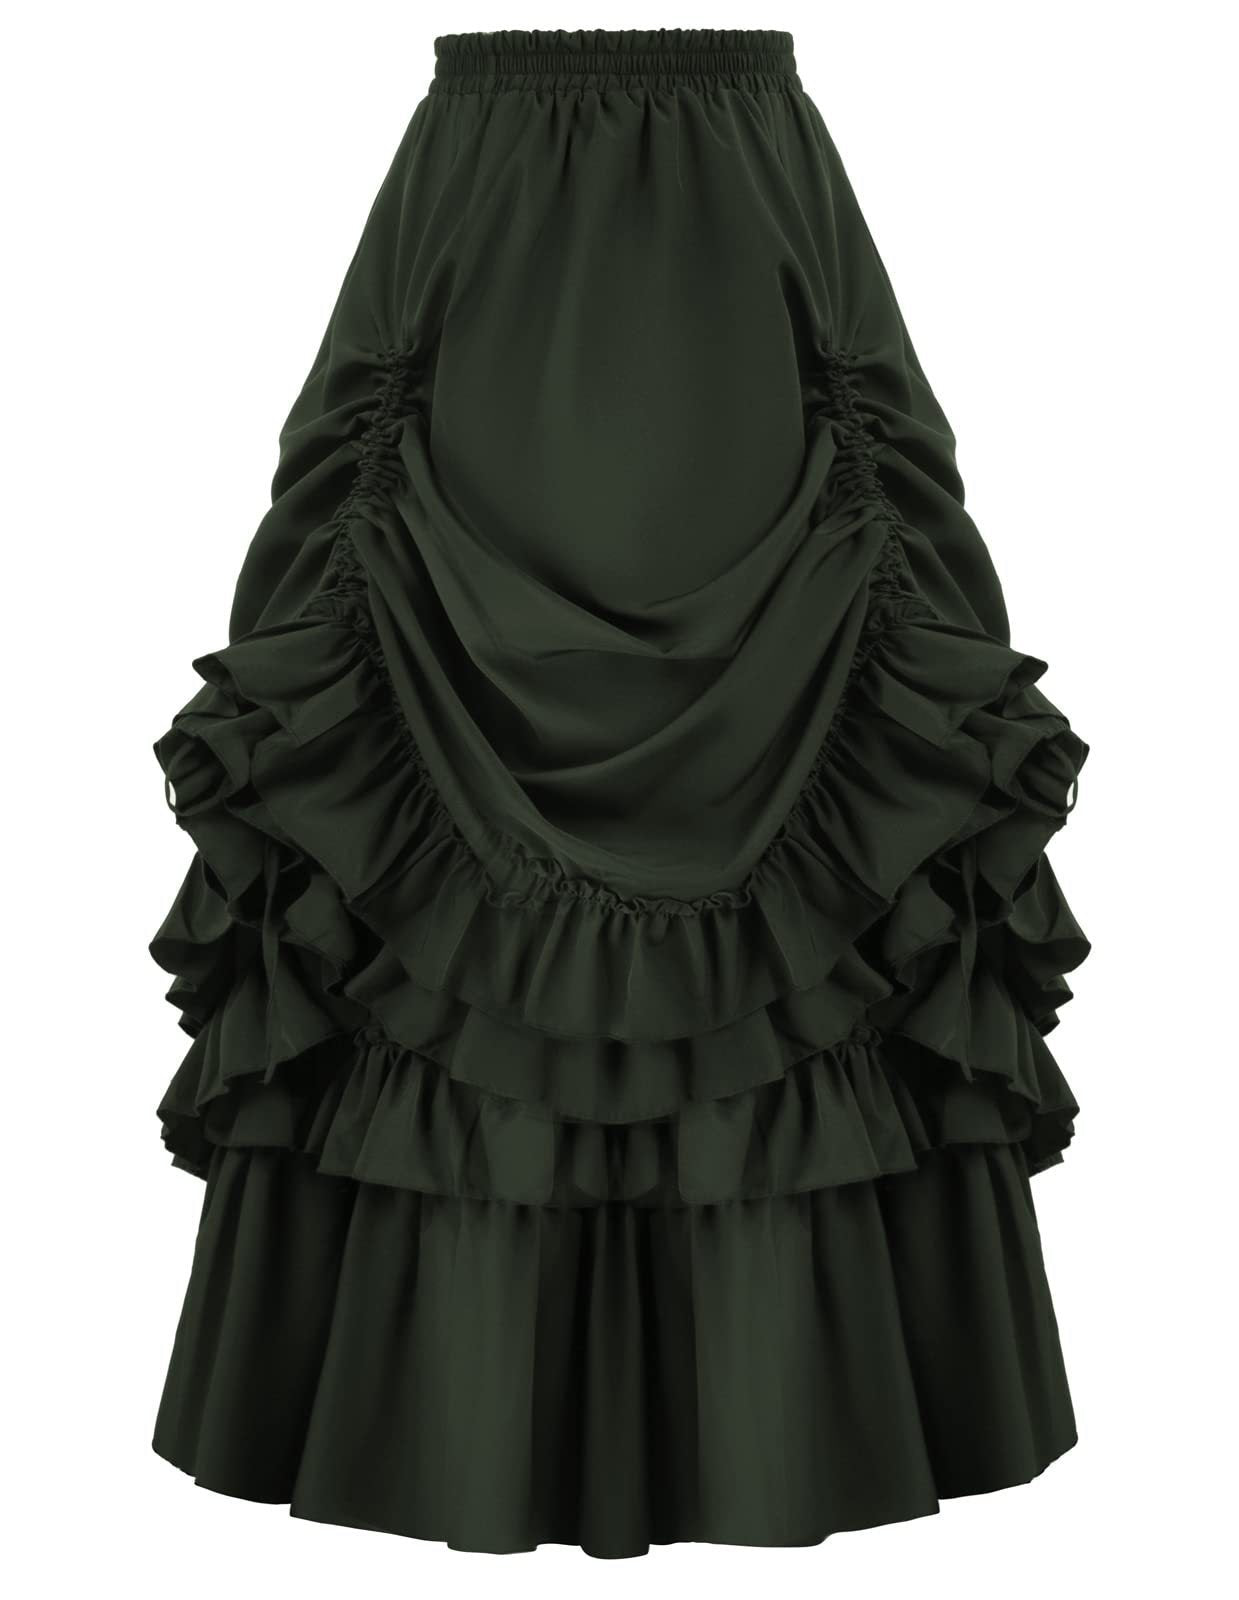 A black, brown and green Women's Vintage Gothic Victorian Skirt from Maramalive™ with ruffles.